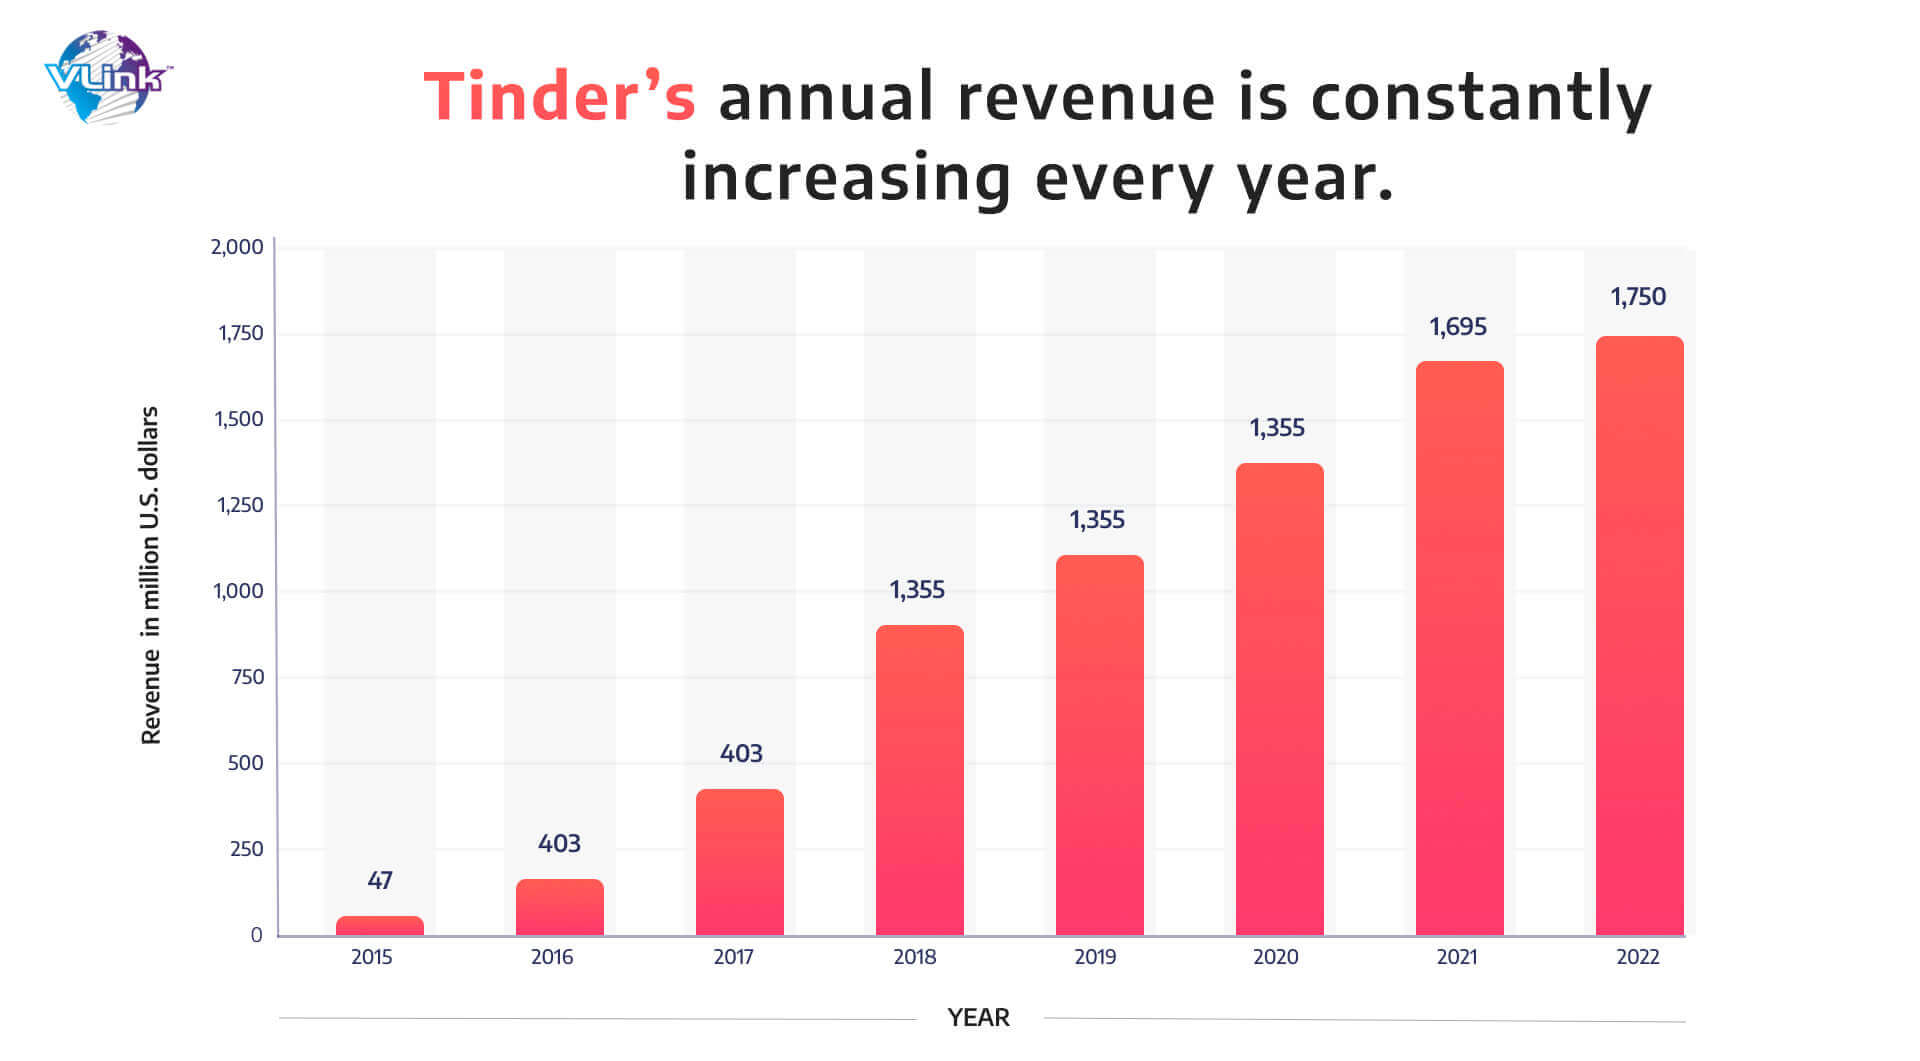 Tinder’s annual revenue is constantly increasing every year